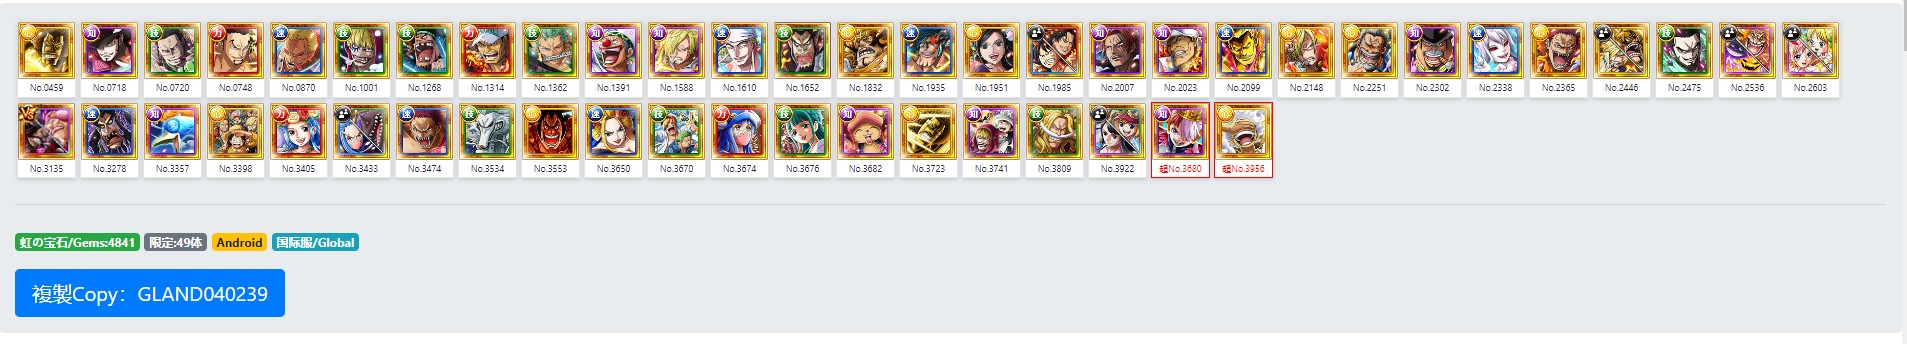 G5 Luffy & Uta [Android] GLOBAL Best Starter lv3 Story Untouched Top Tier Characters 4800+ Gems Check Description